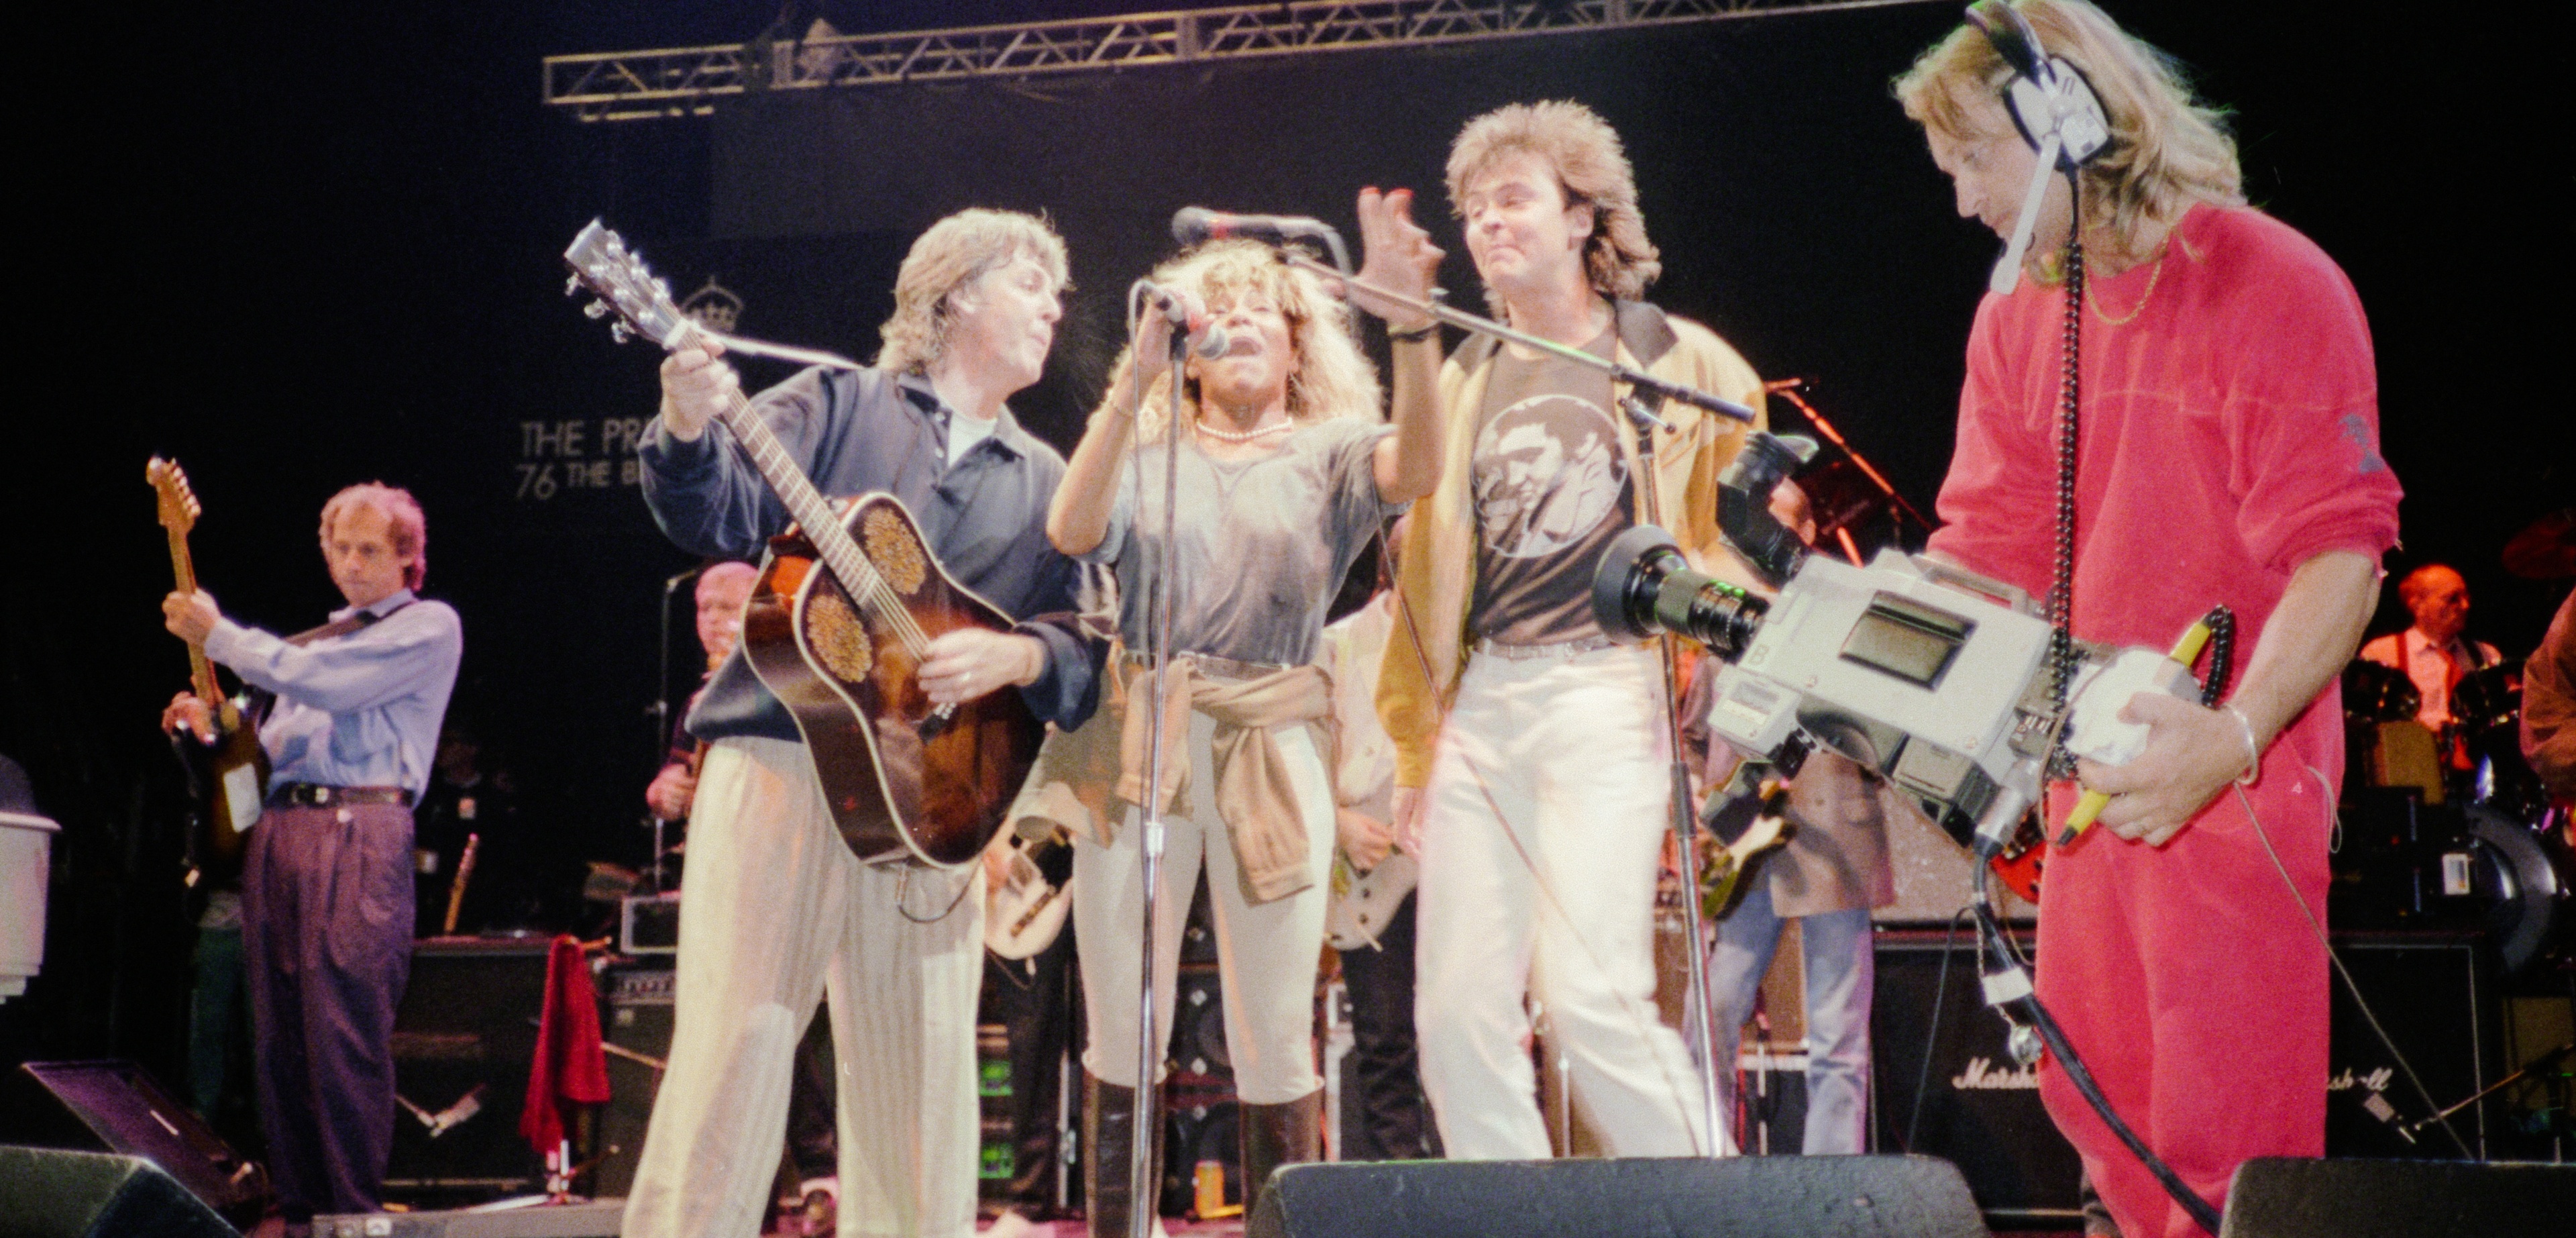 Photo of Paul McCartney, Tina Turner and Paul Young at the Prince's Trust Rock Gala in 1986